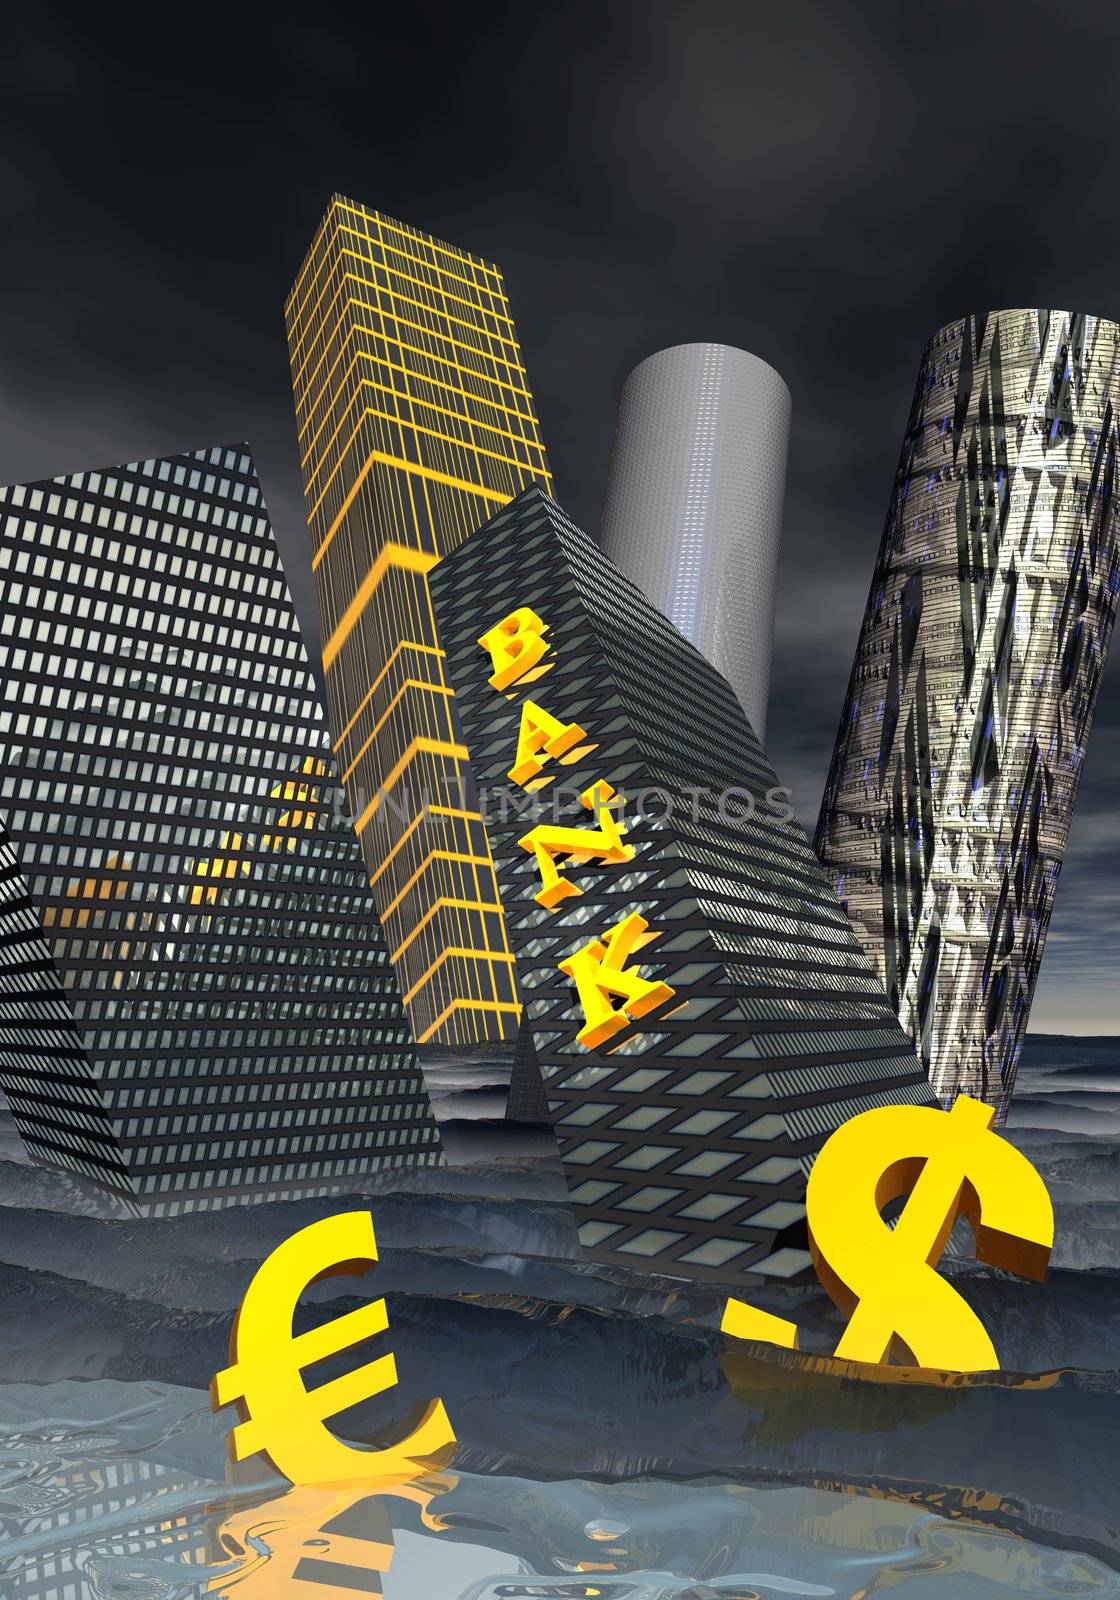 Bank building and financial skyscrapers next to dollar and euro currency drowning in the ocean to symbolize financial crisis